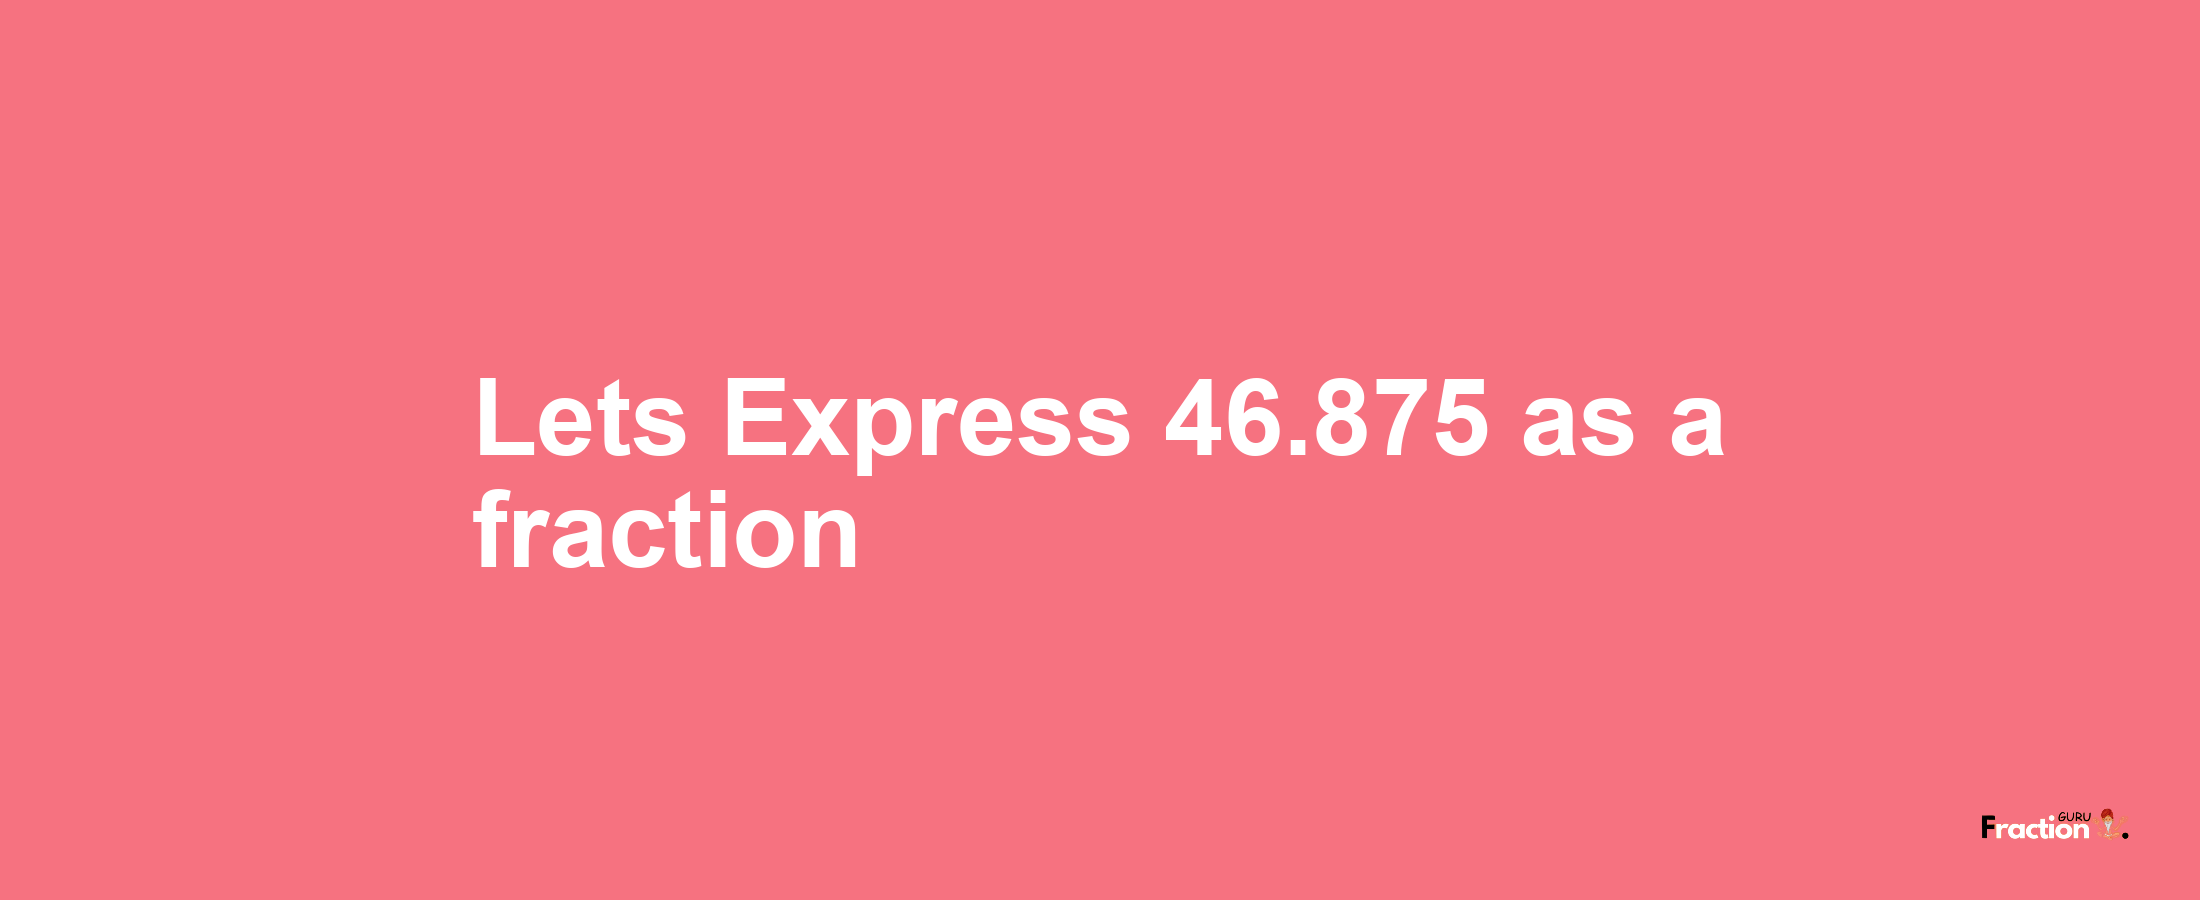 Lets Express 46.875 as afraction